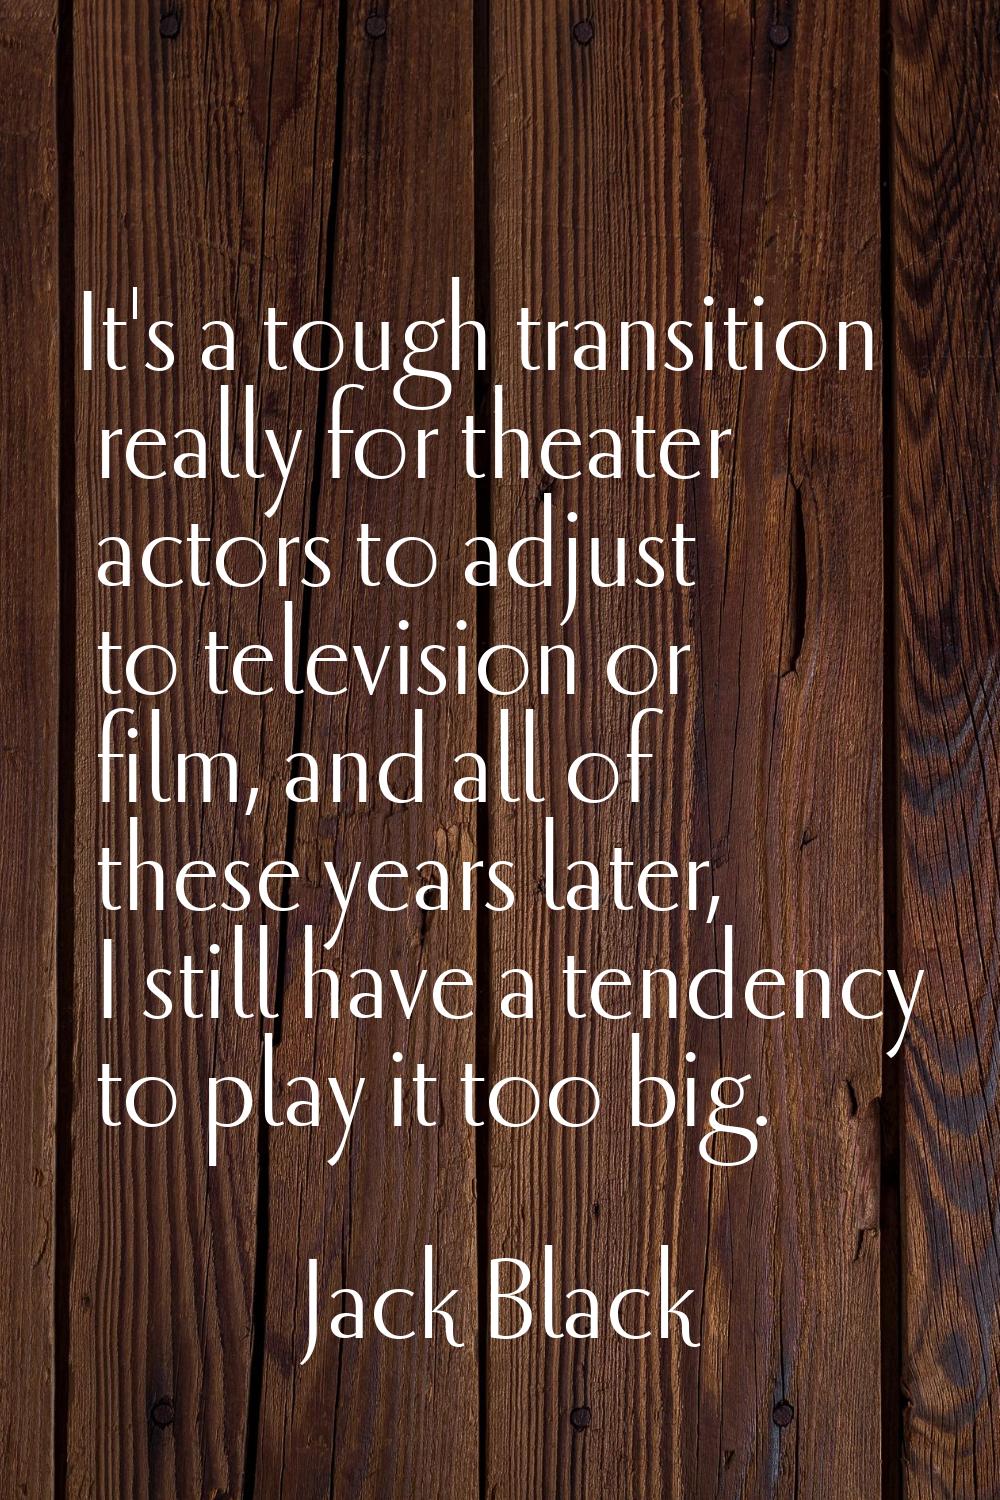 It's a tough transition really for theater actors to adjust to television or film, and all of these